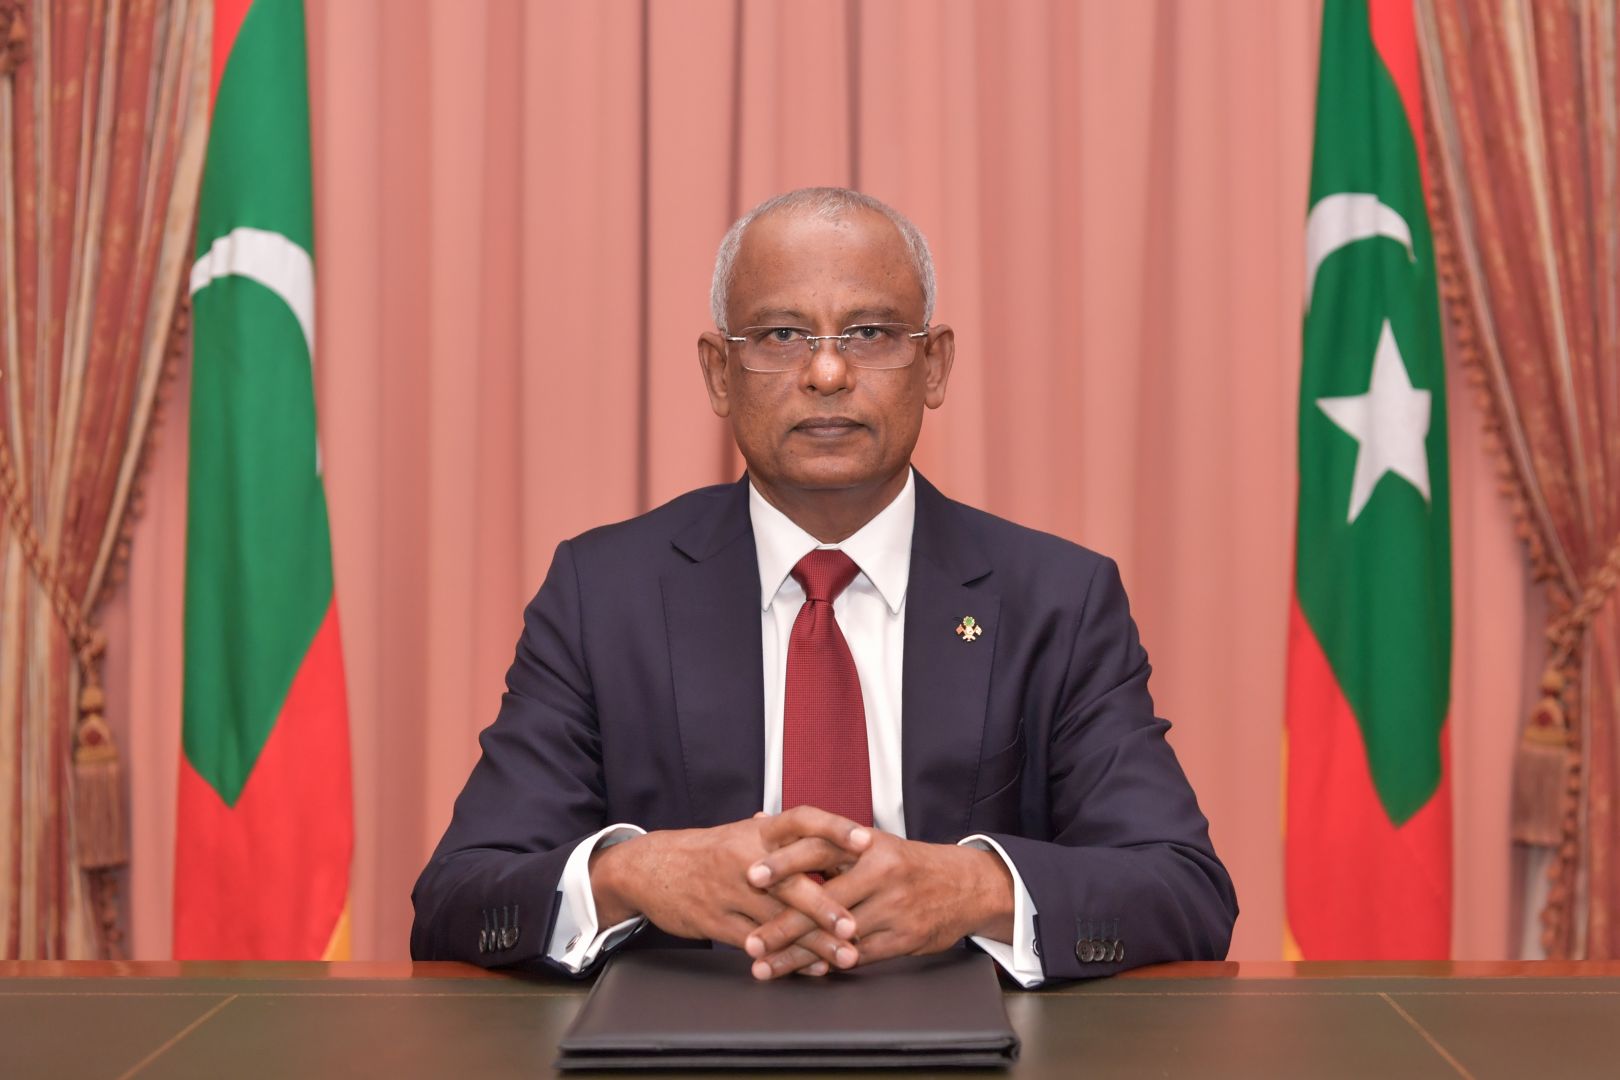 President of Maldives sends letter to Azerbaijani President on occasion of May 28 - Independence Day